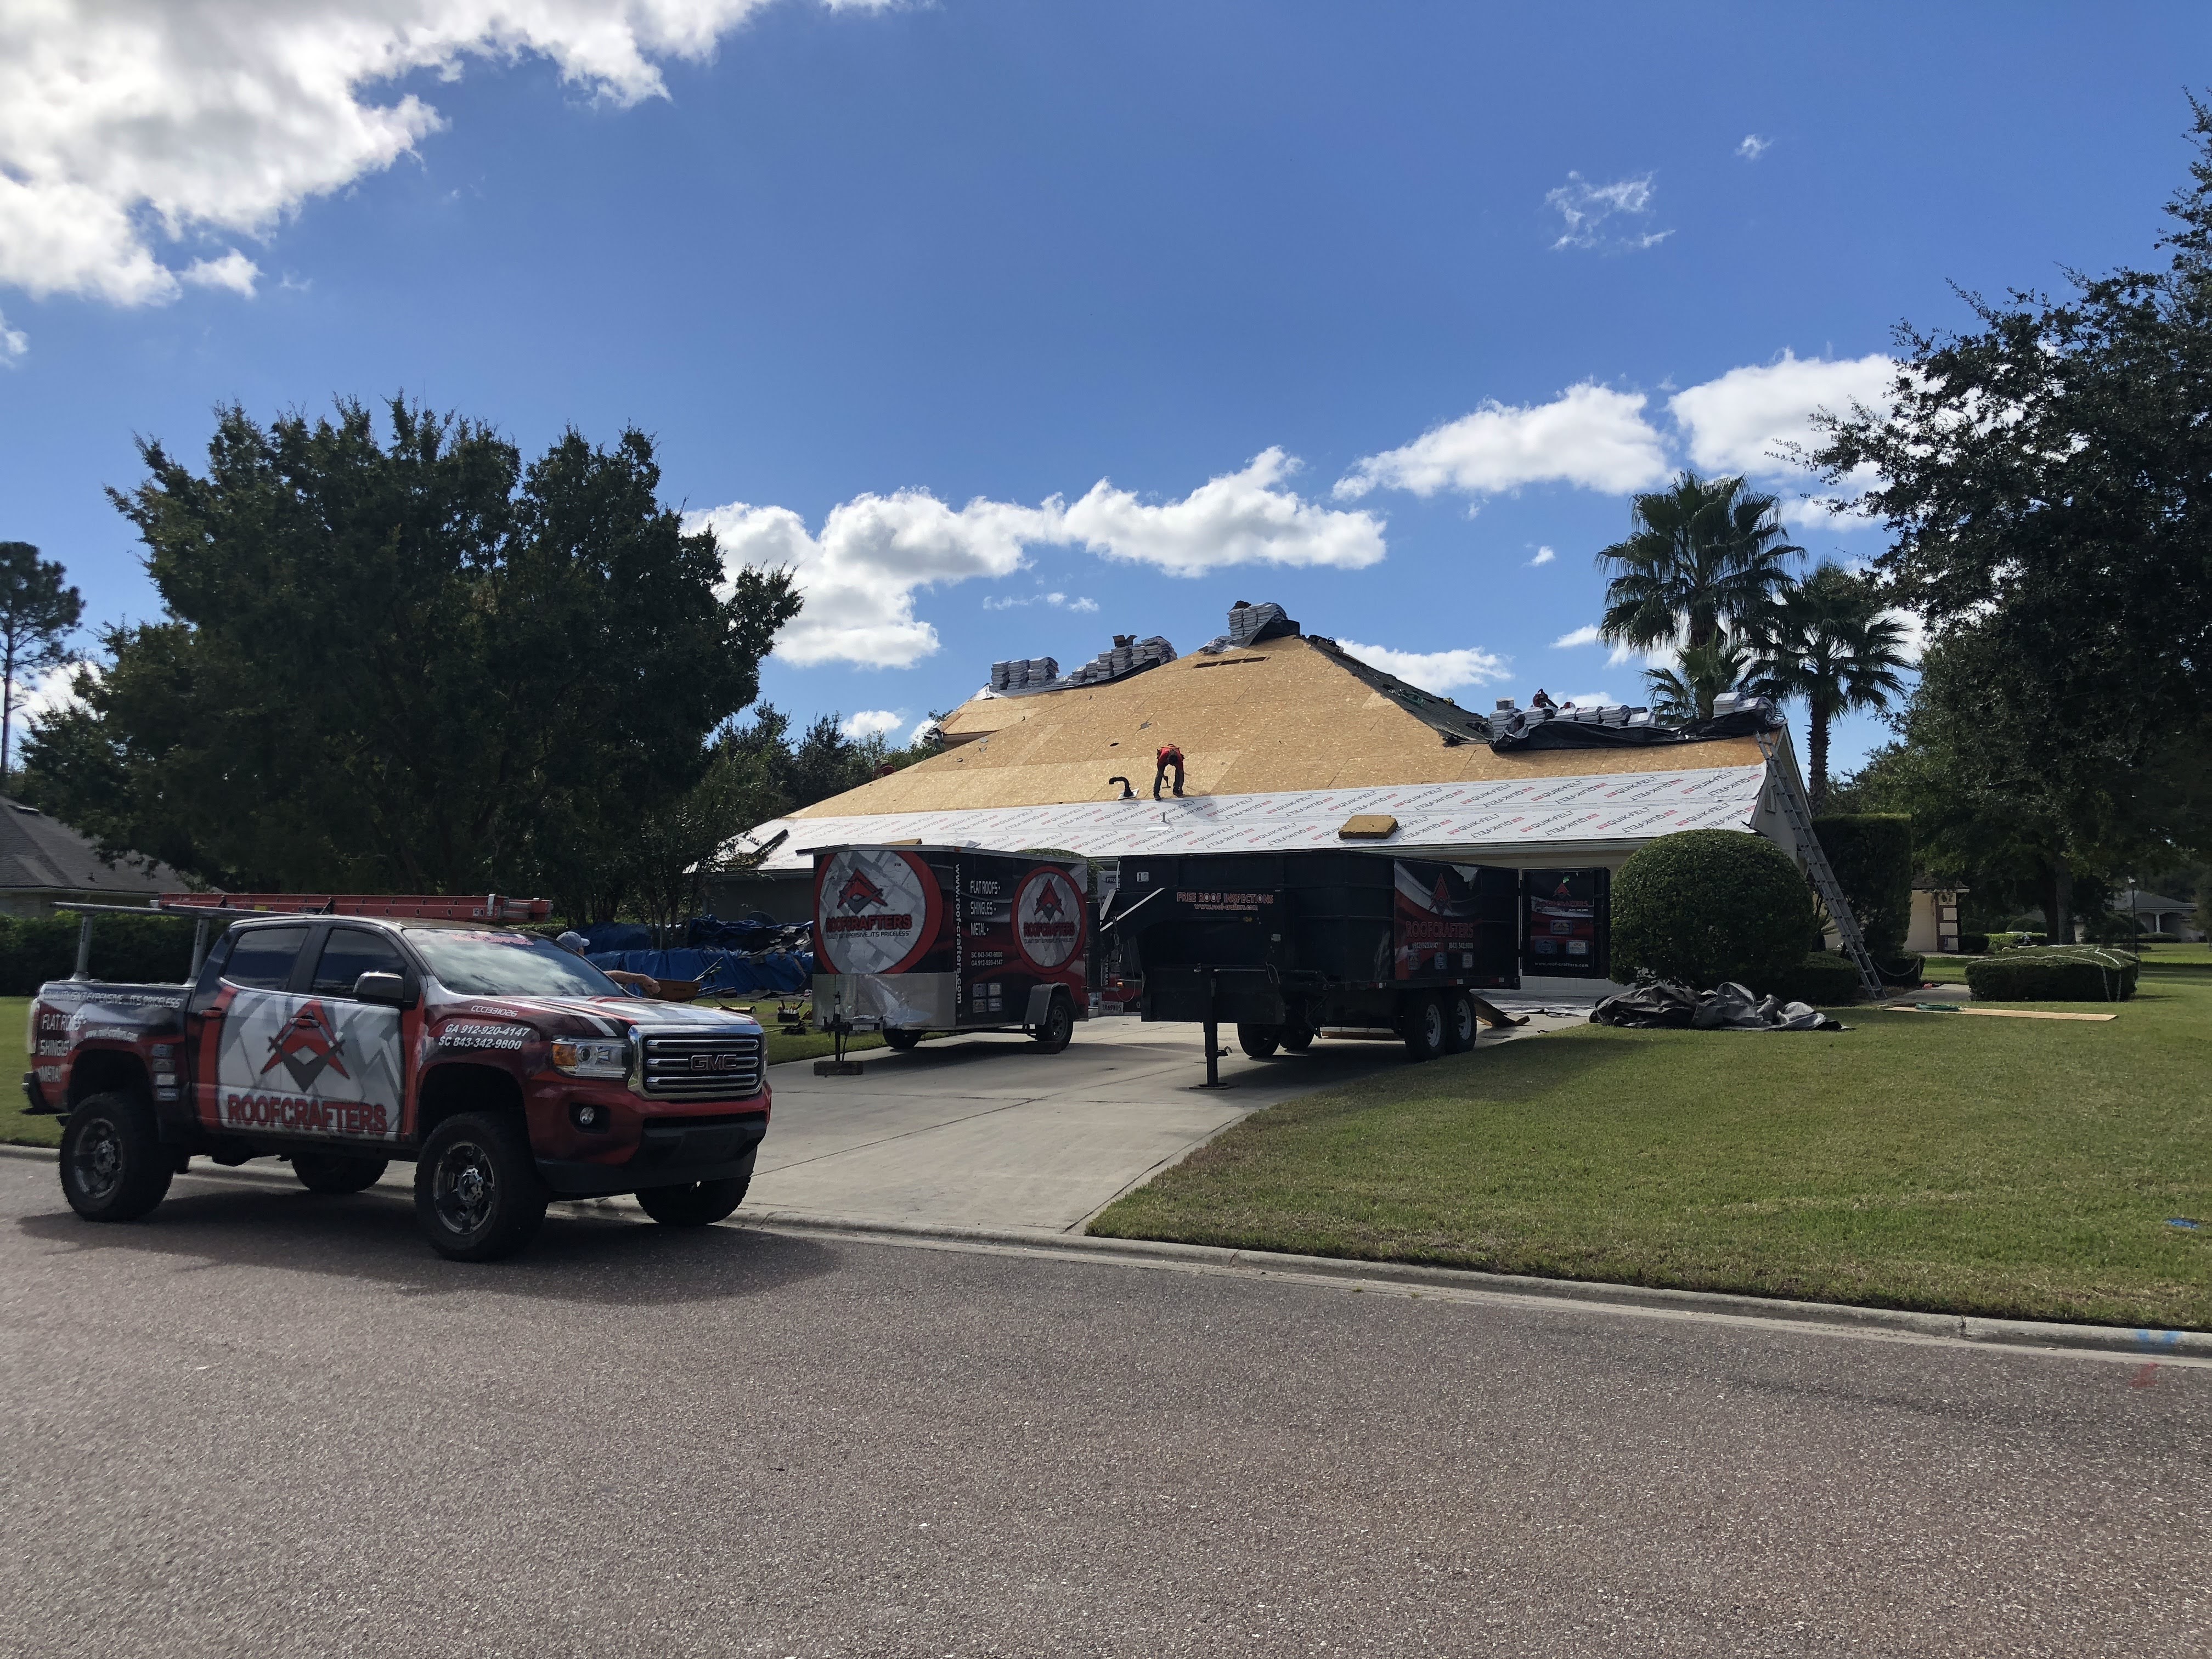 roof replacement in progress